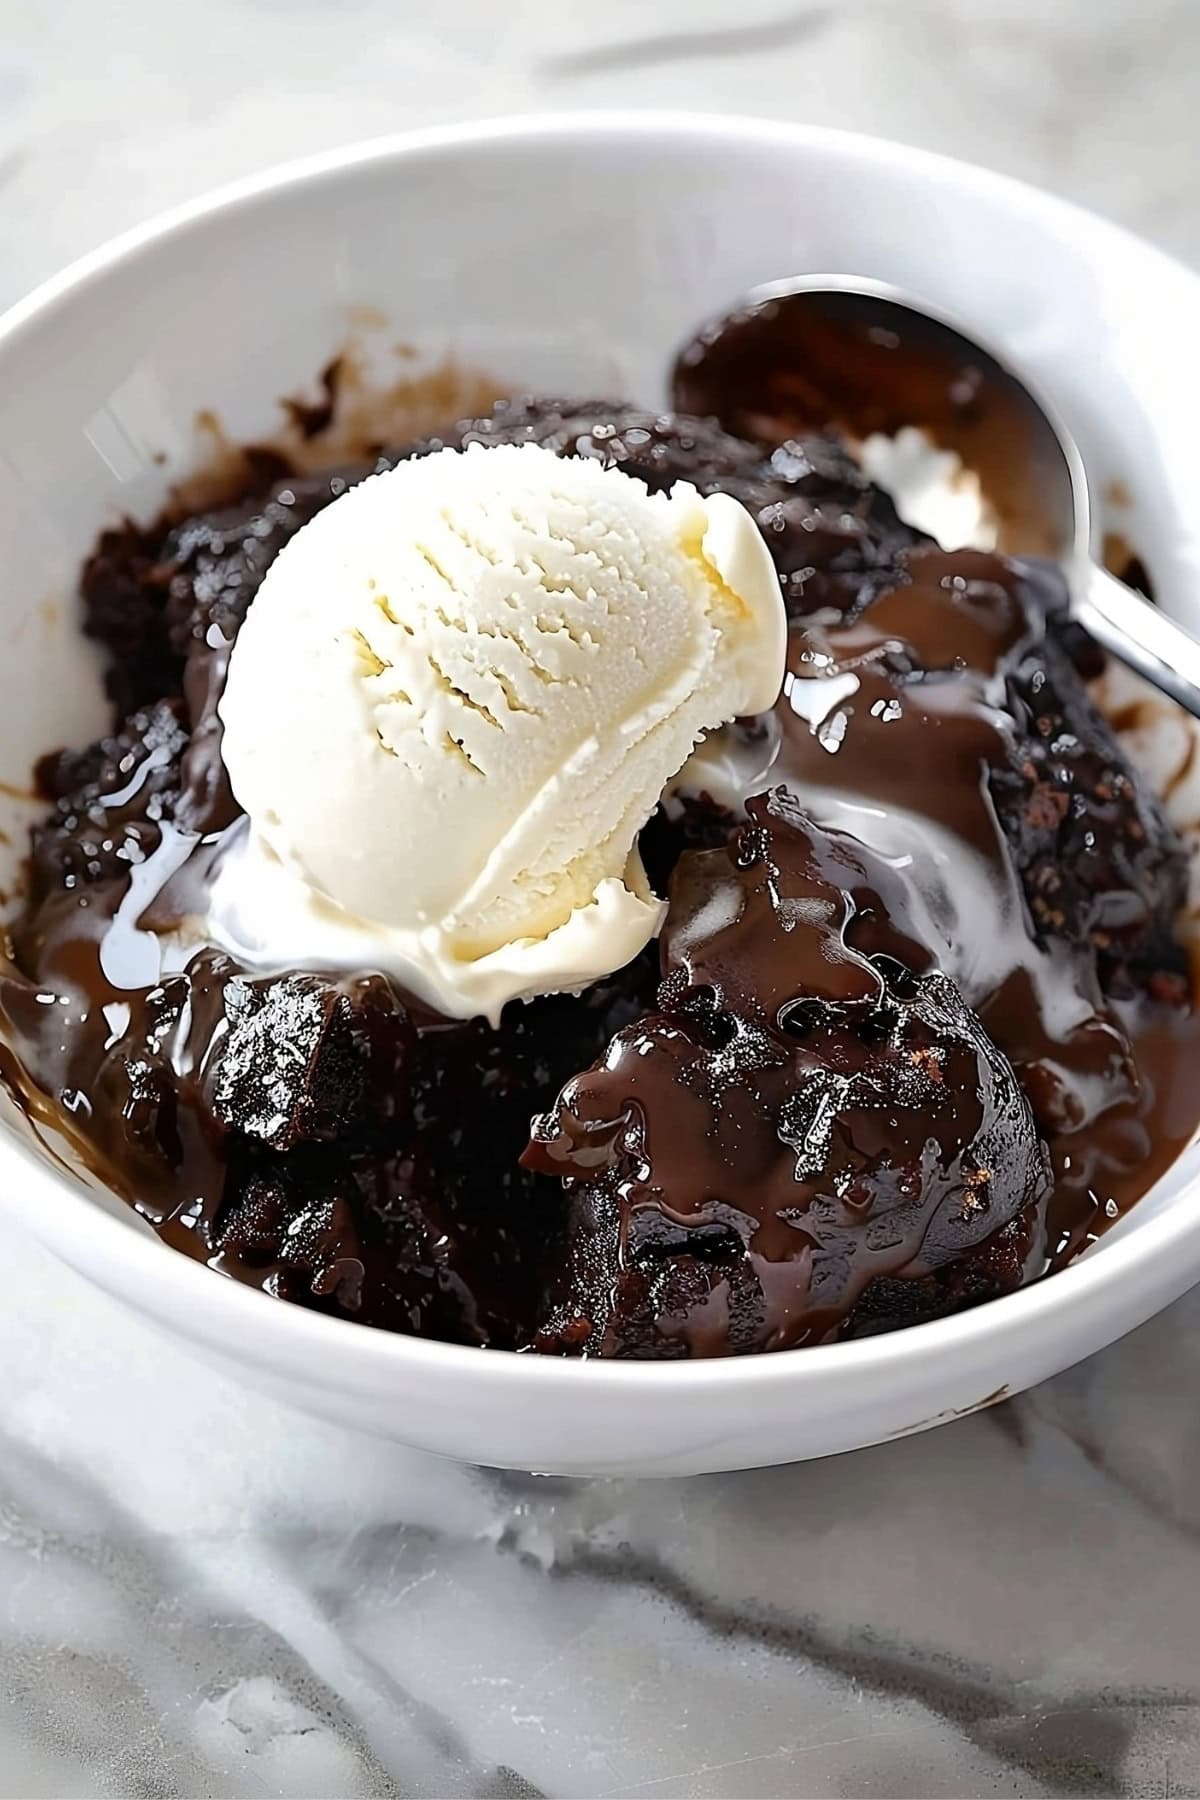 A serving of gooey and moist chocolate cobbler served in a white bowl.